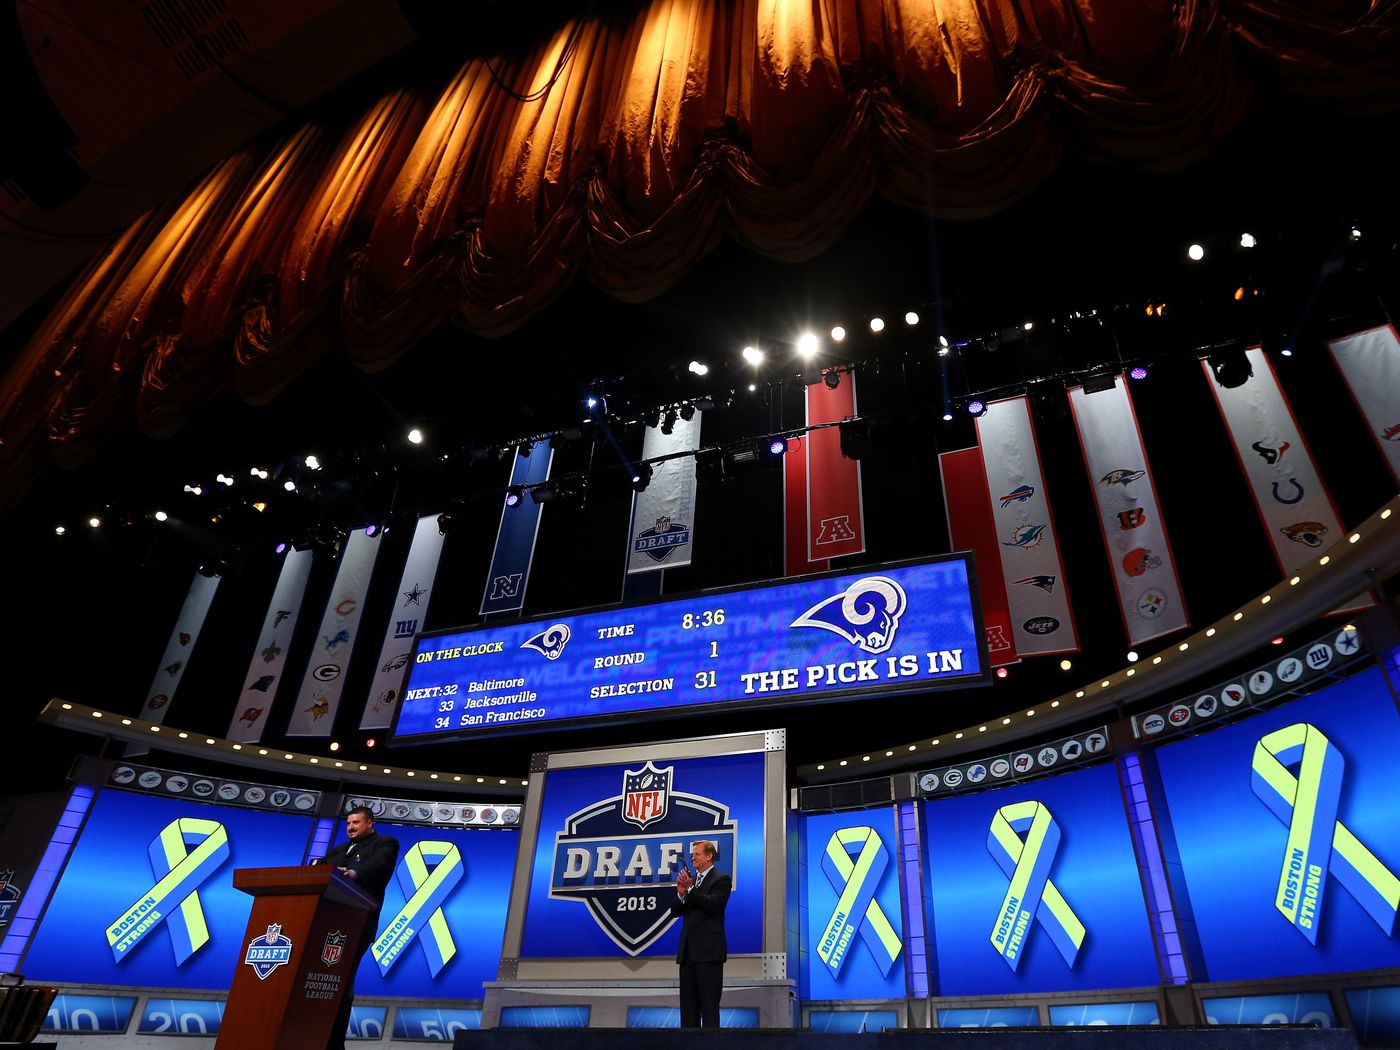 nfl draft live feed online